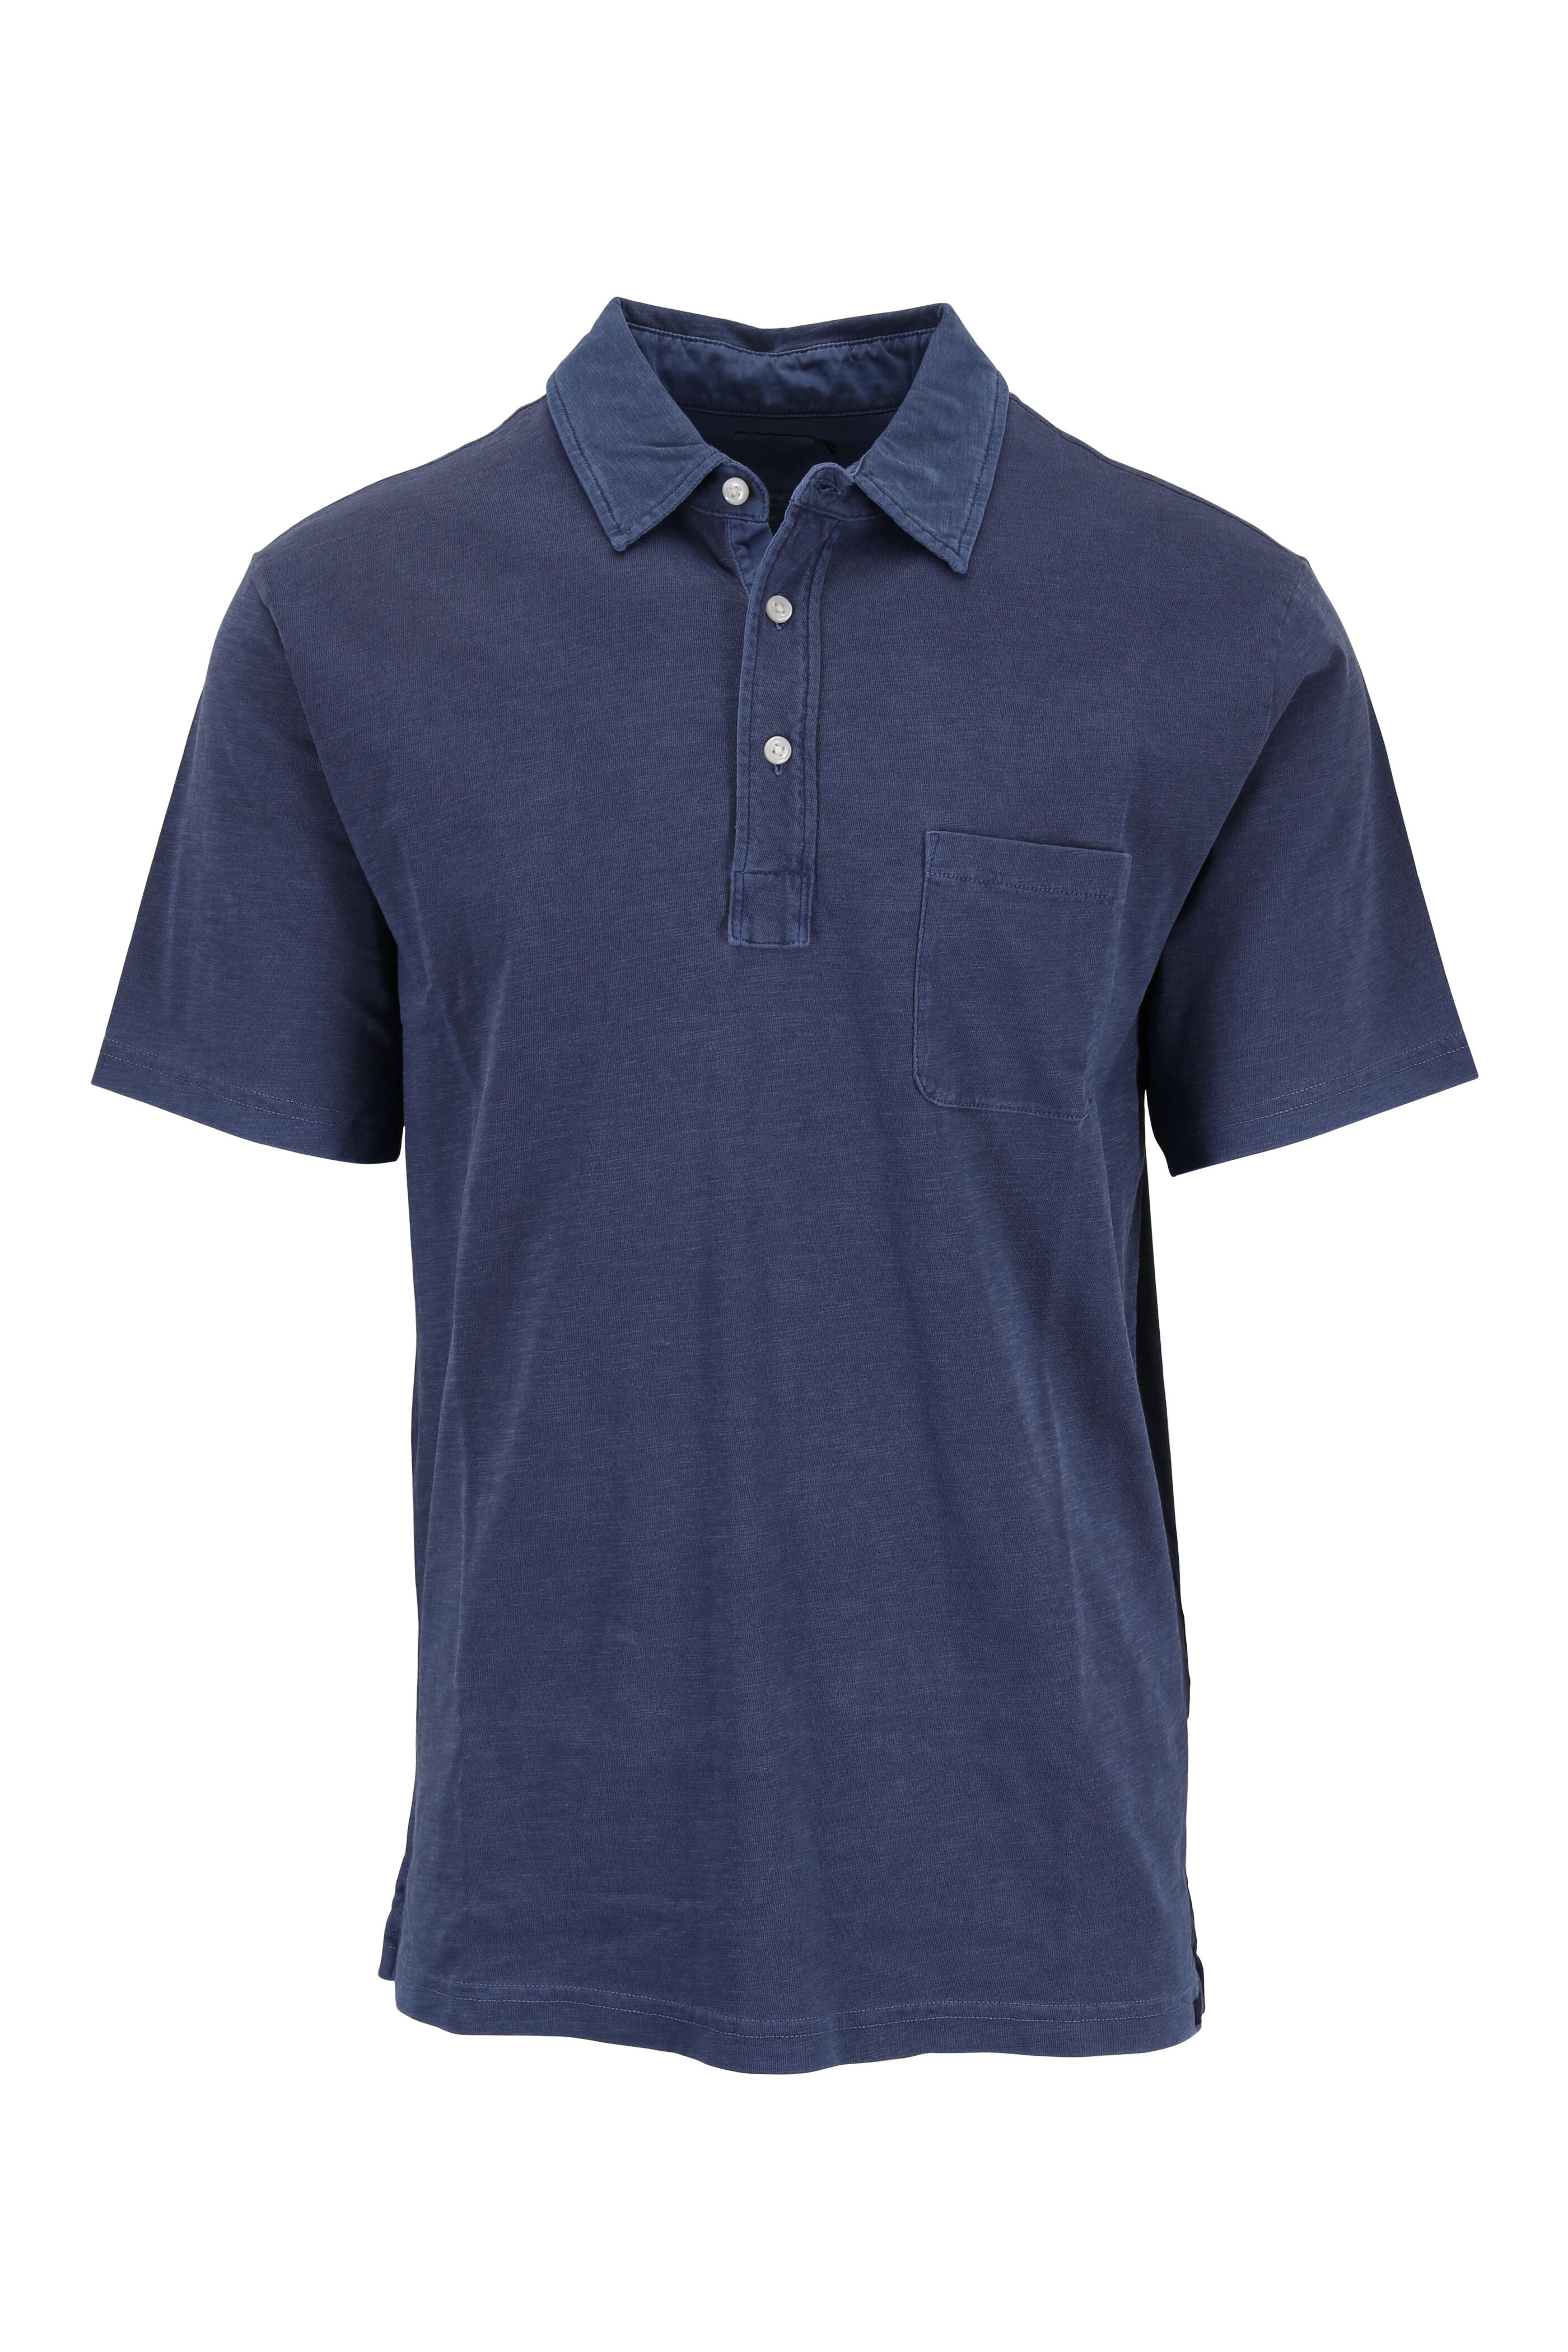 Faherty Brand - Navy Sunwashed Pocket Polo | Mitchell Stores